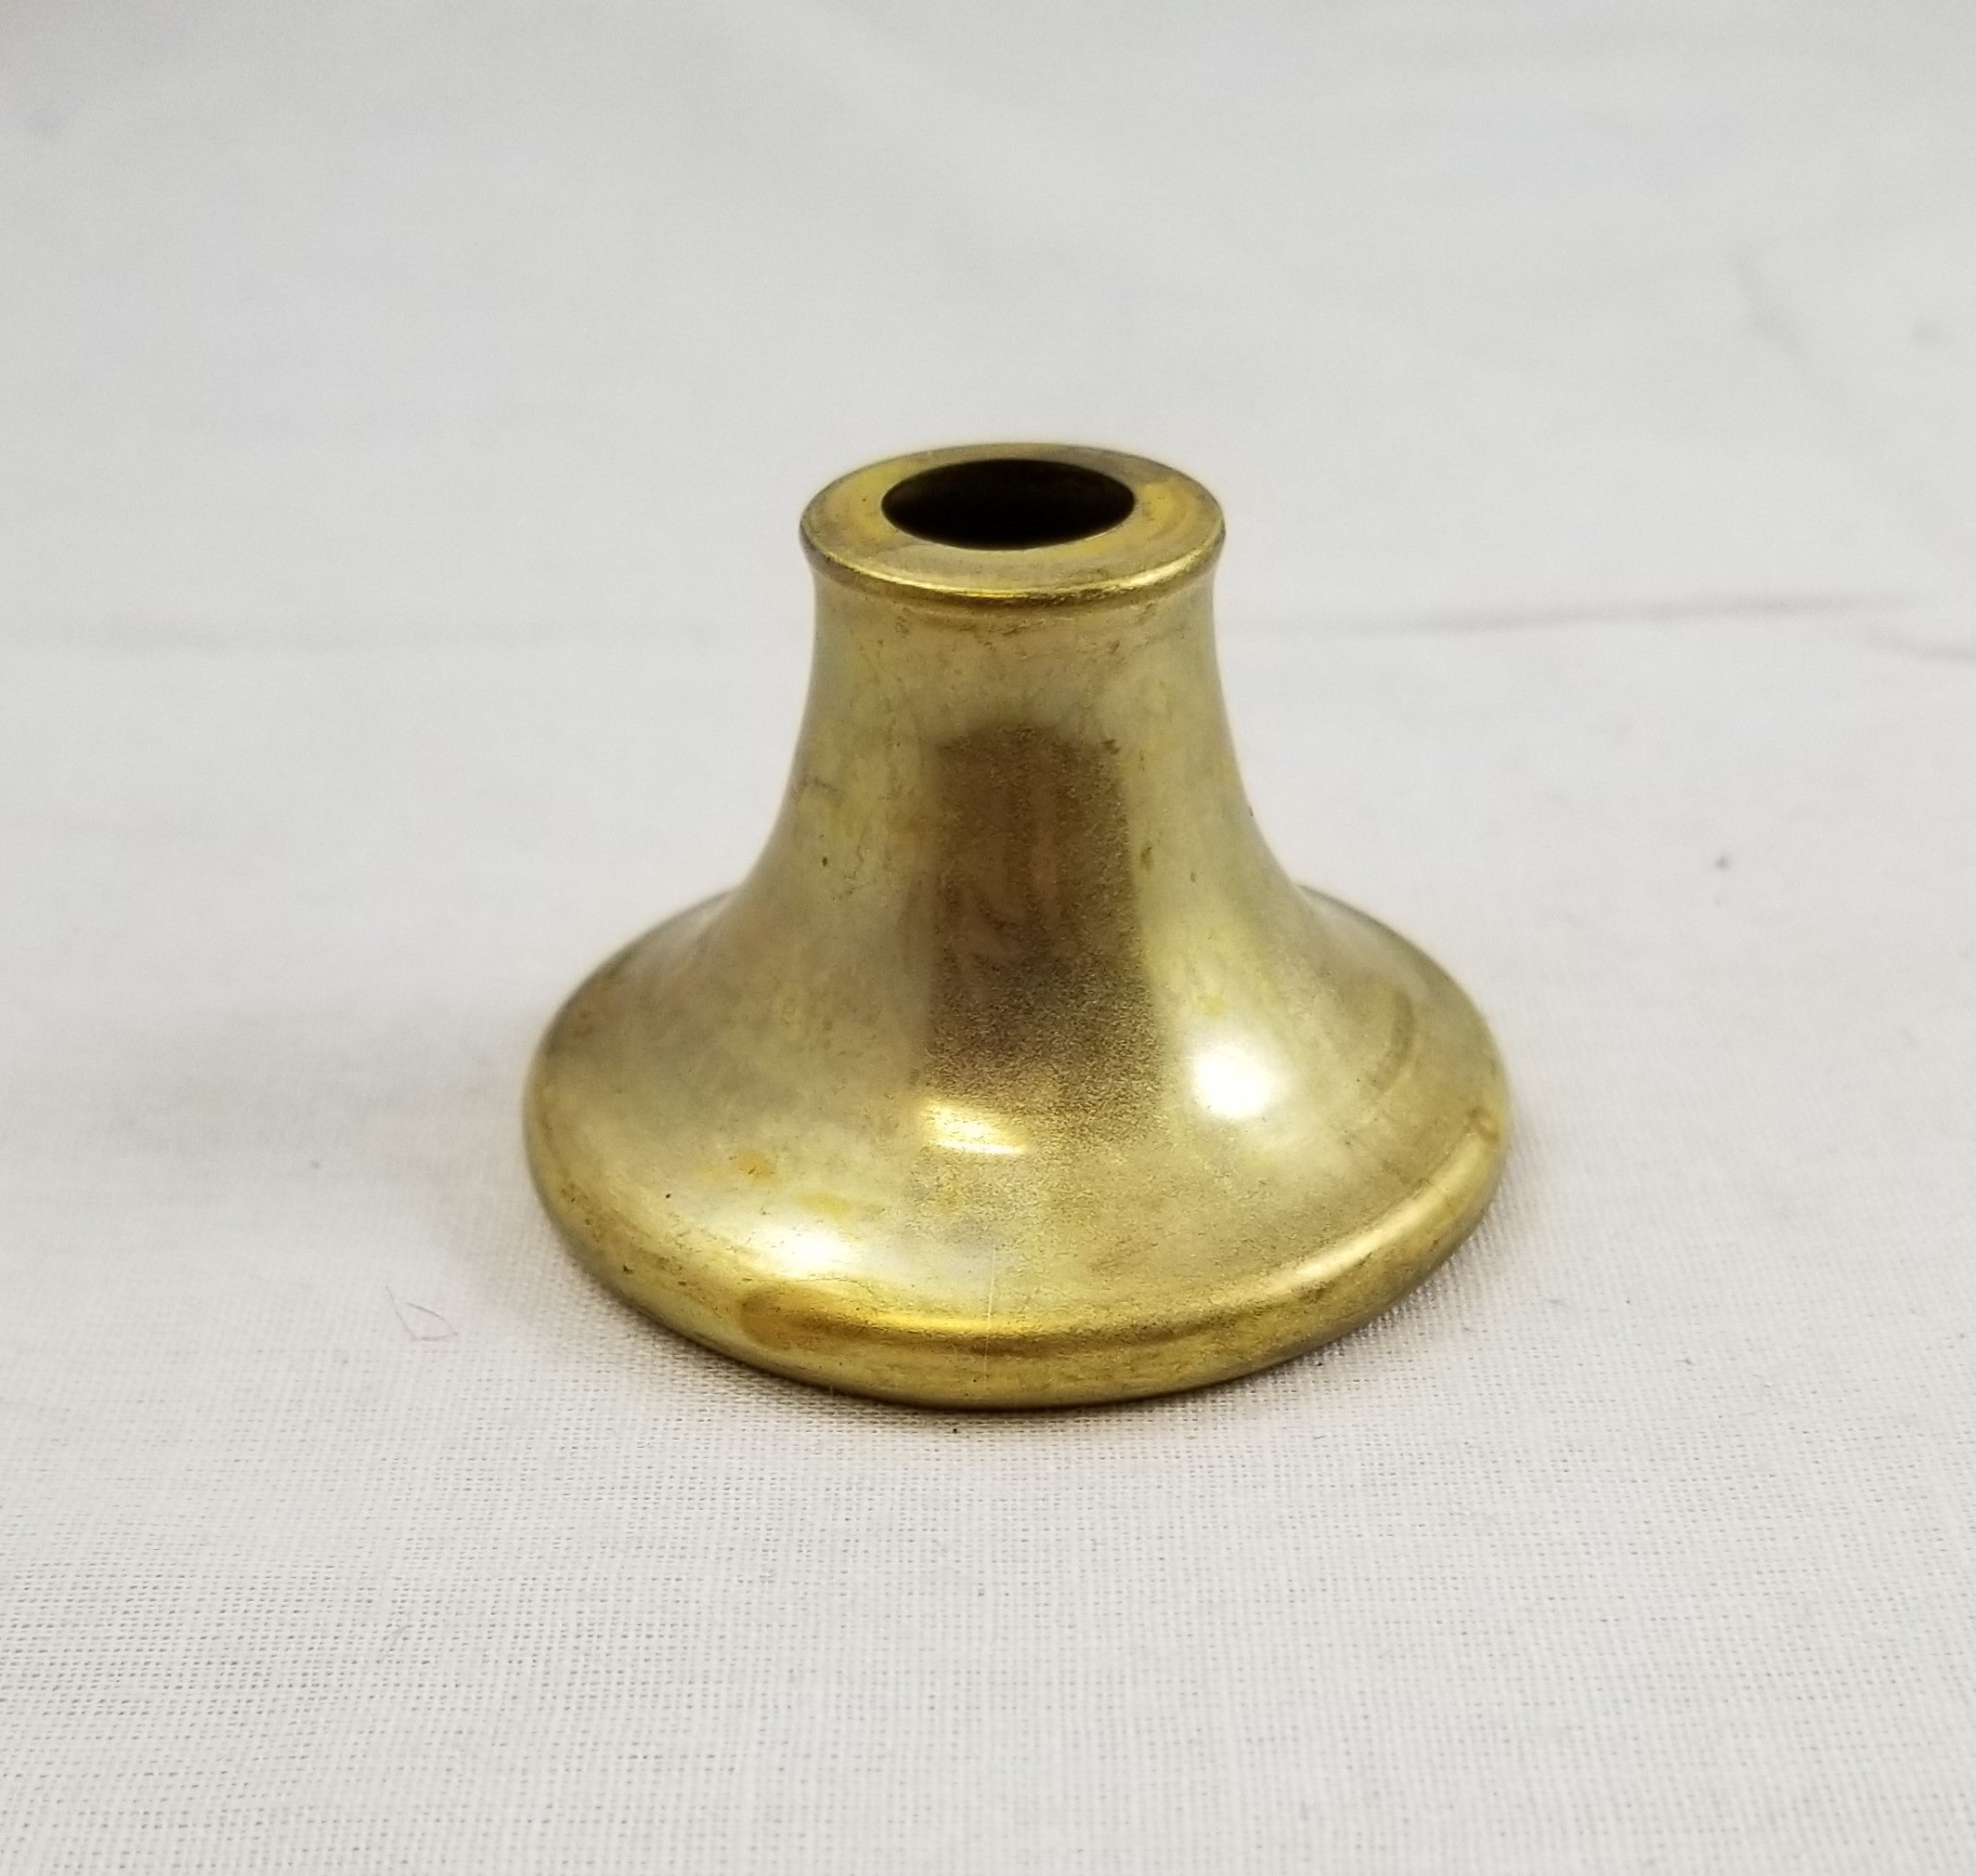 Solid Brass, Unfinished, Neck or Break – My Lamp Parts